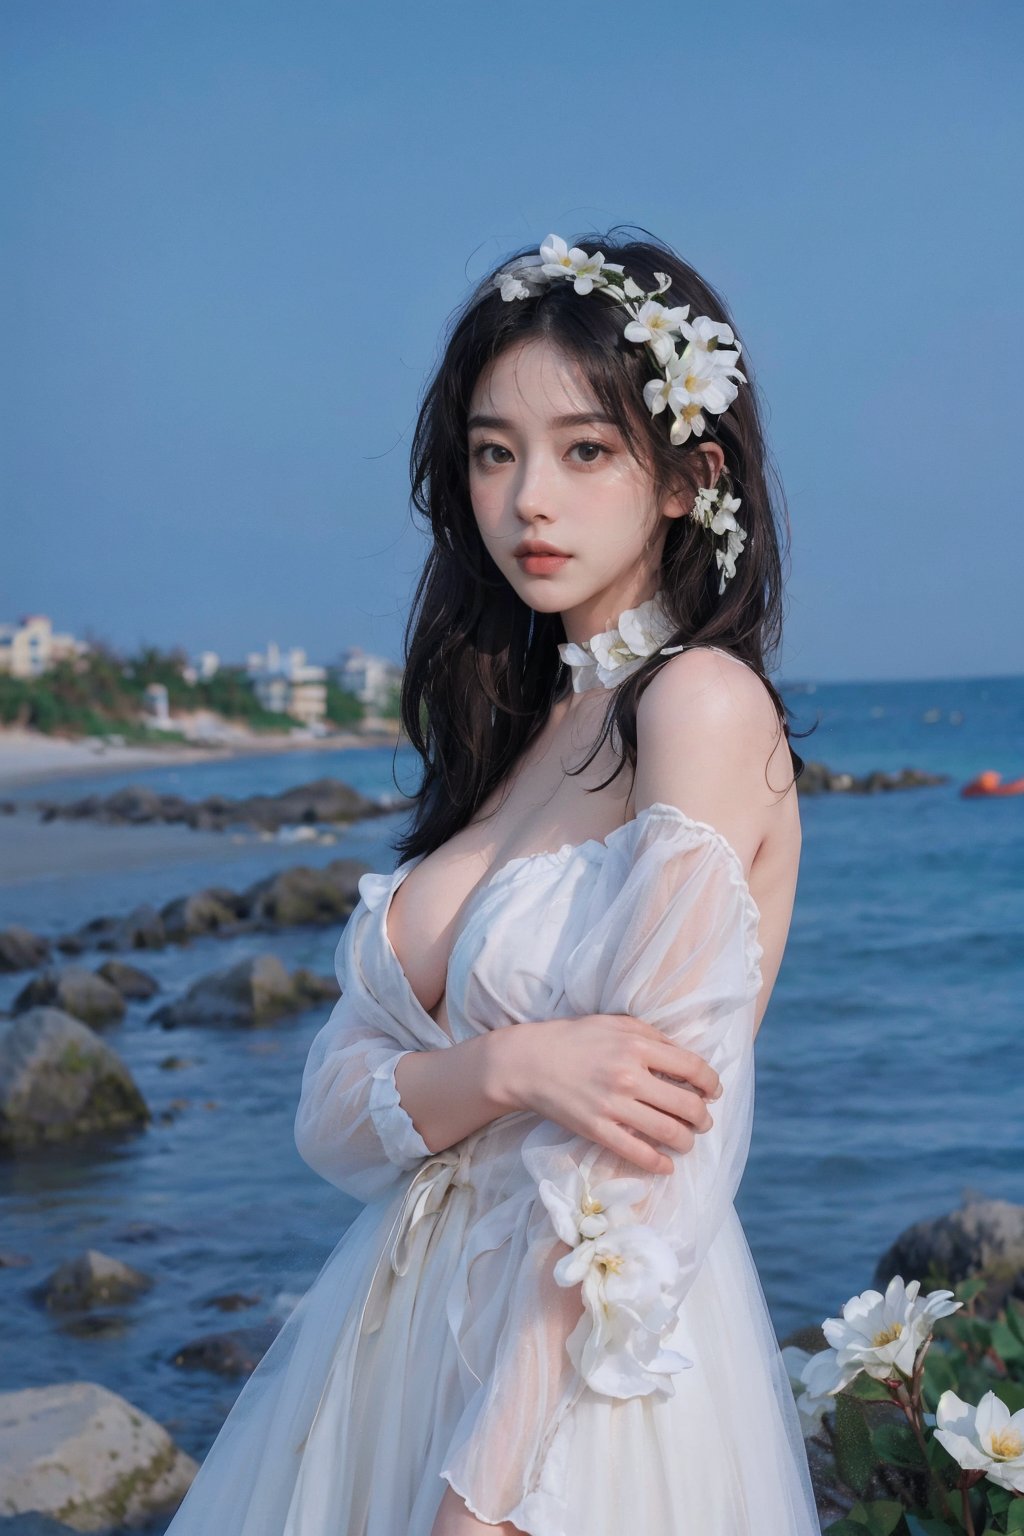 8k, best quality, masterpiece, realistic, high detail, photo realistic, Increase quality, beach, flower, dress, look at viewer, soft expression, breast